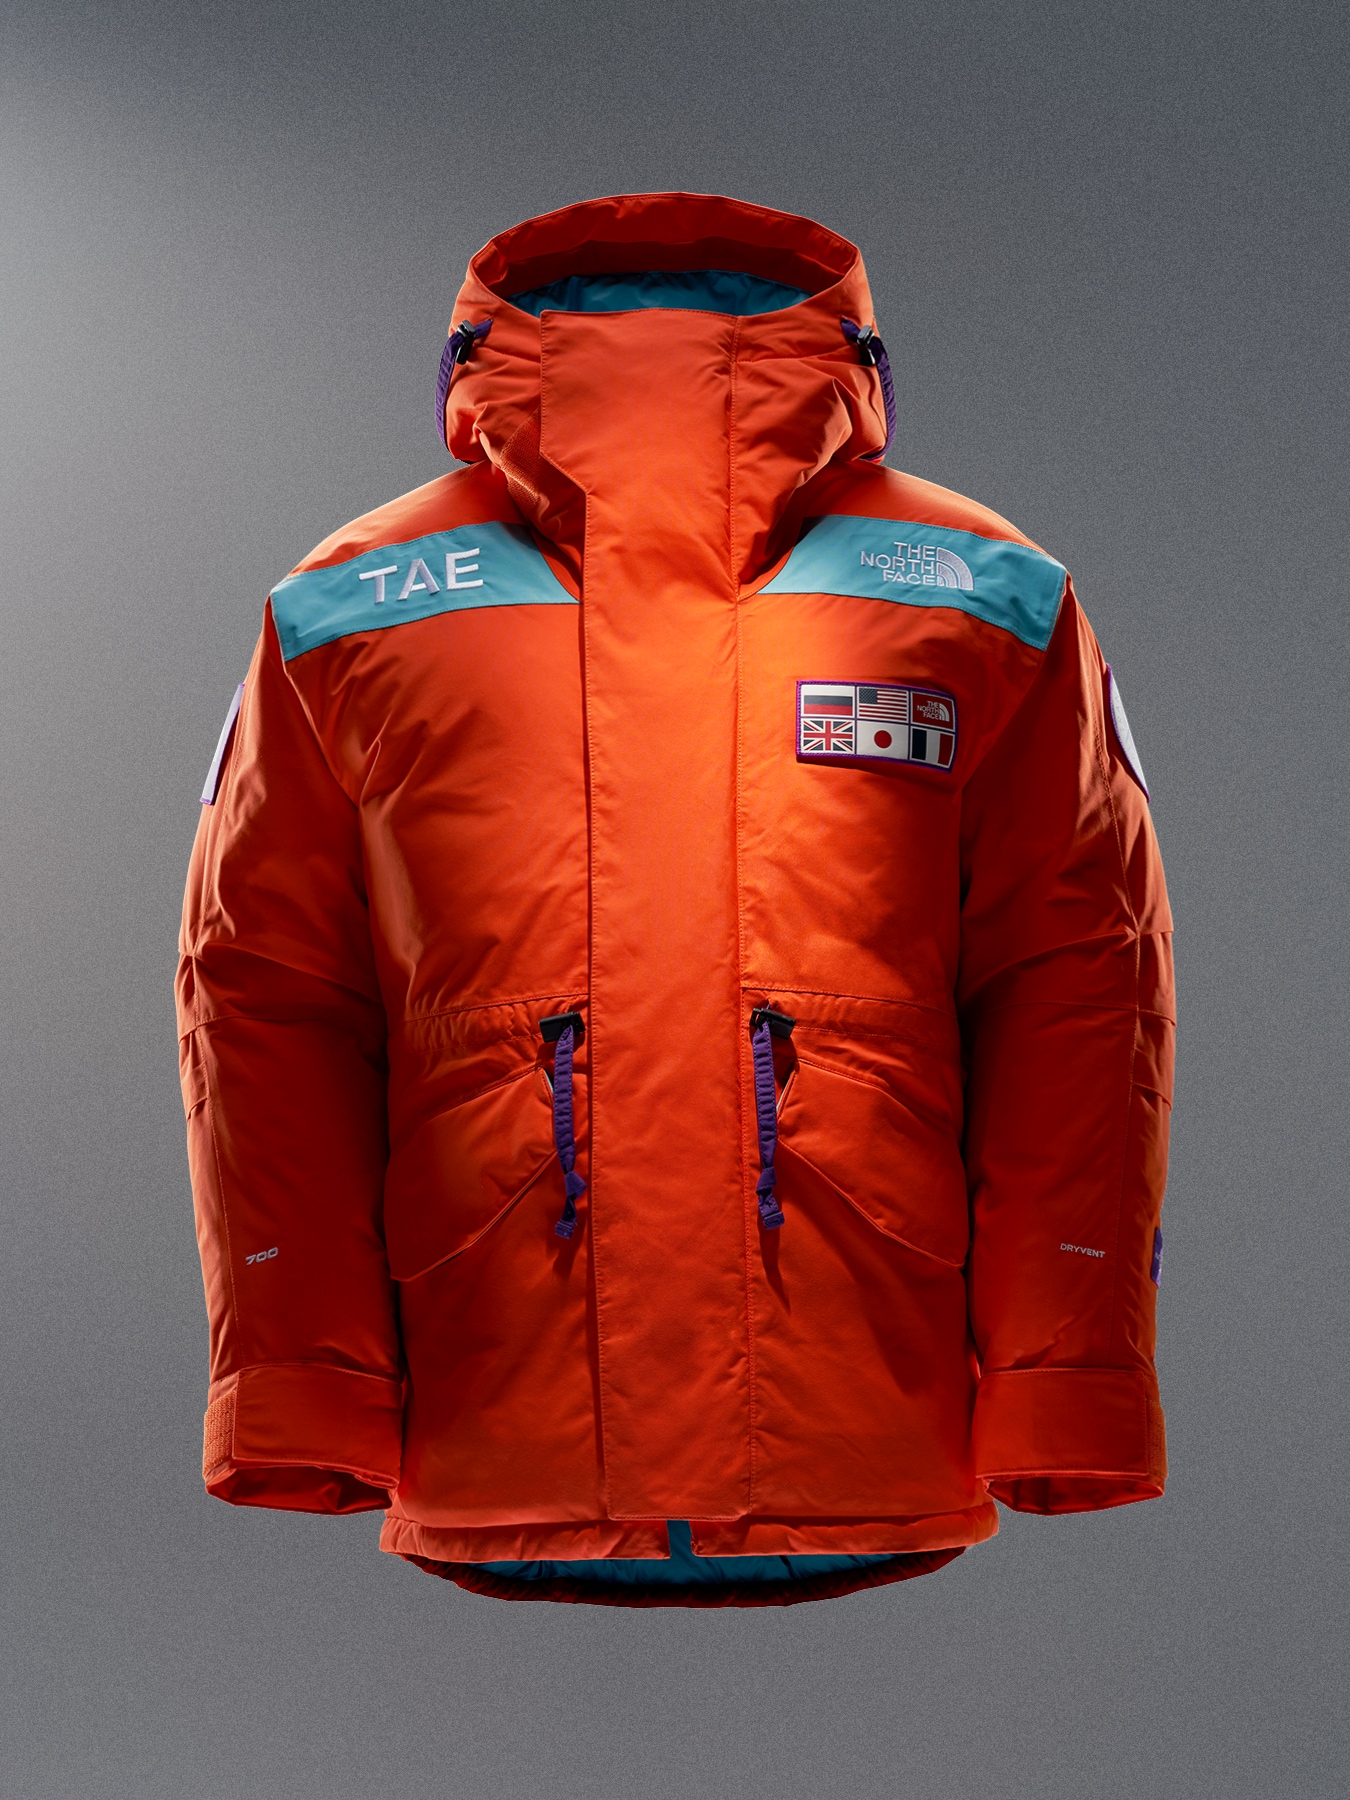 The Trans-Antarctica Expedition Parka | The North Face